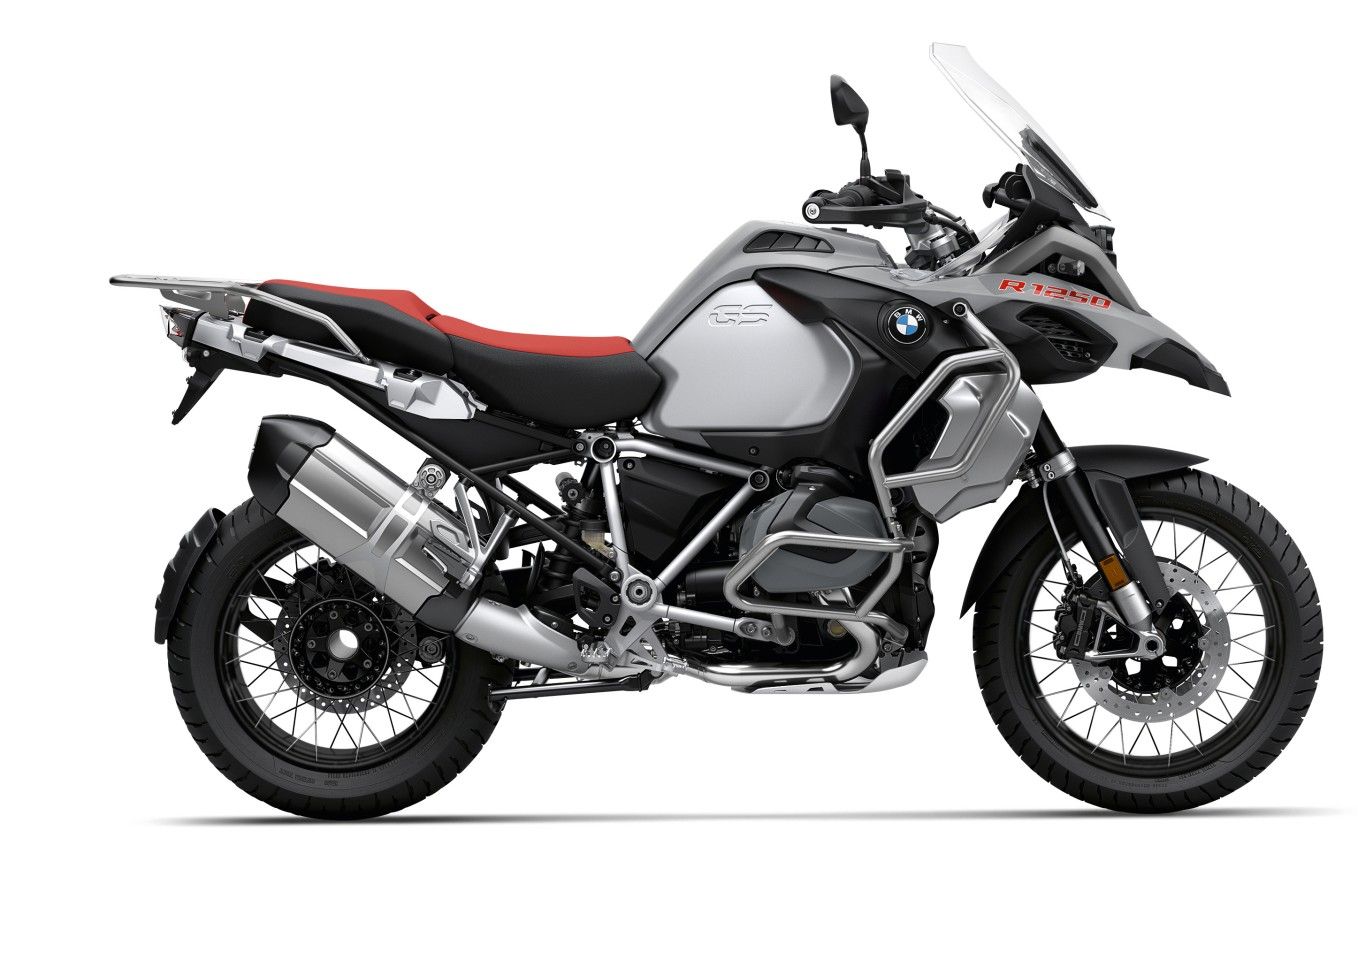 BMW R1250GS And Adventure Get High Tech Upgrades For Their 40th Birthday